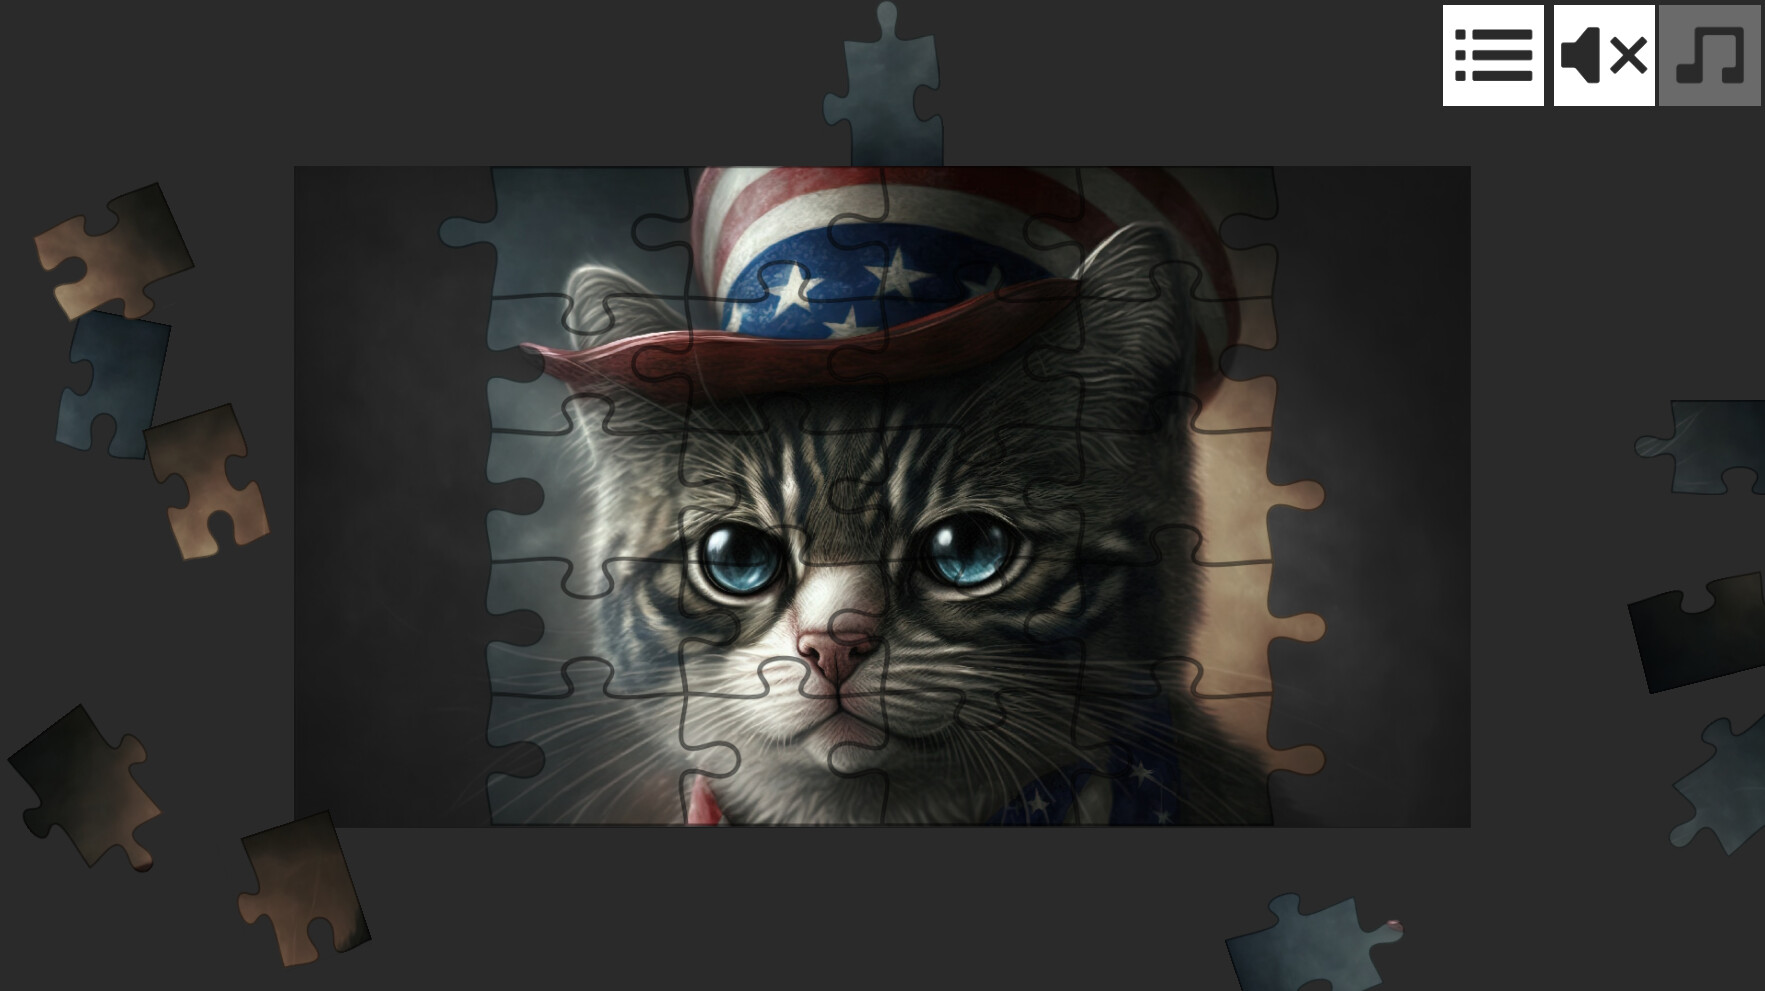 Cat Jigsaw Puzzle Games on Steam